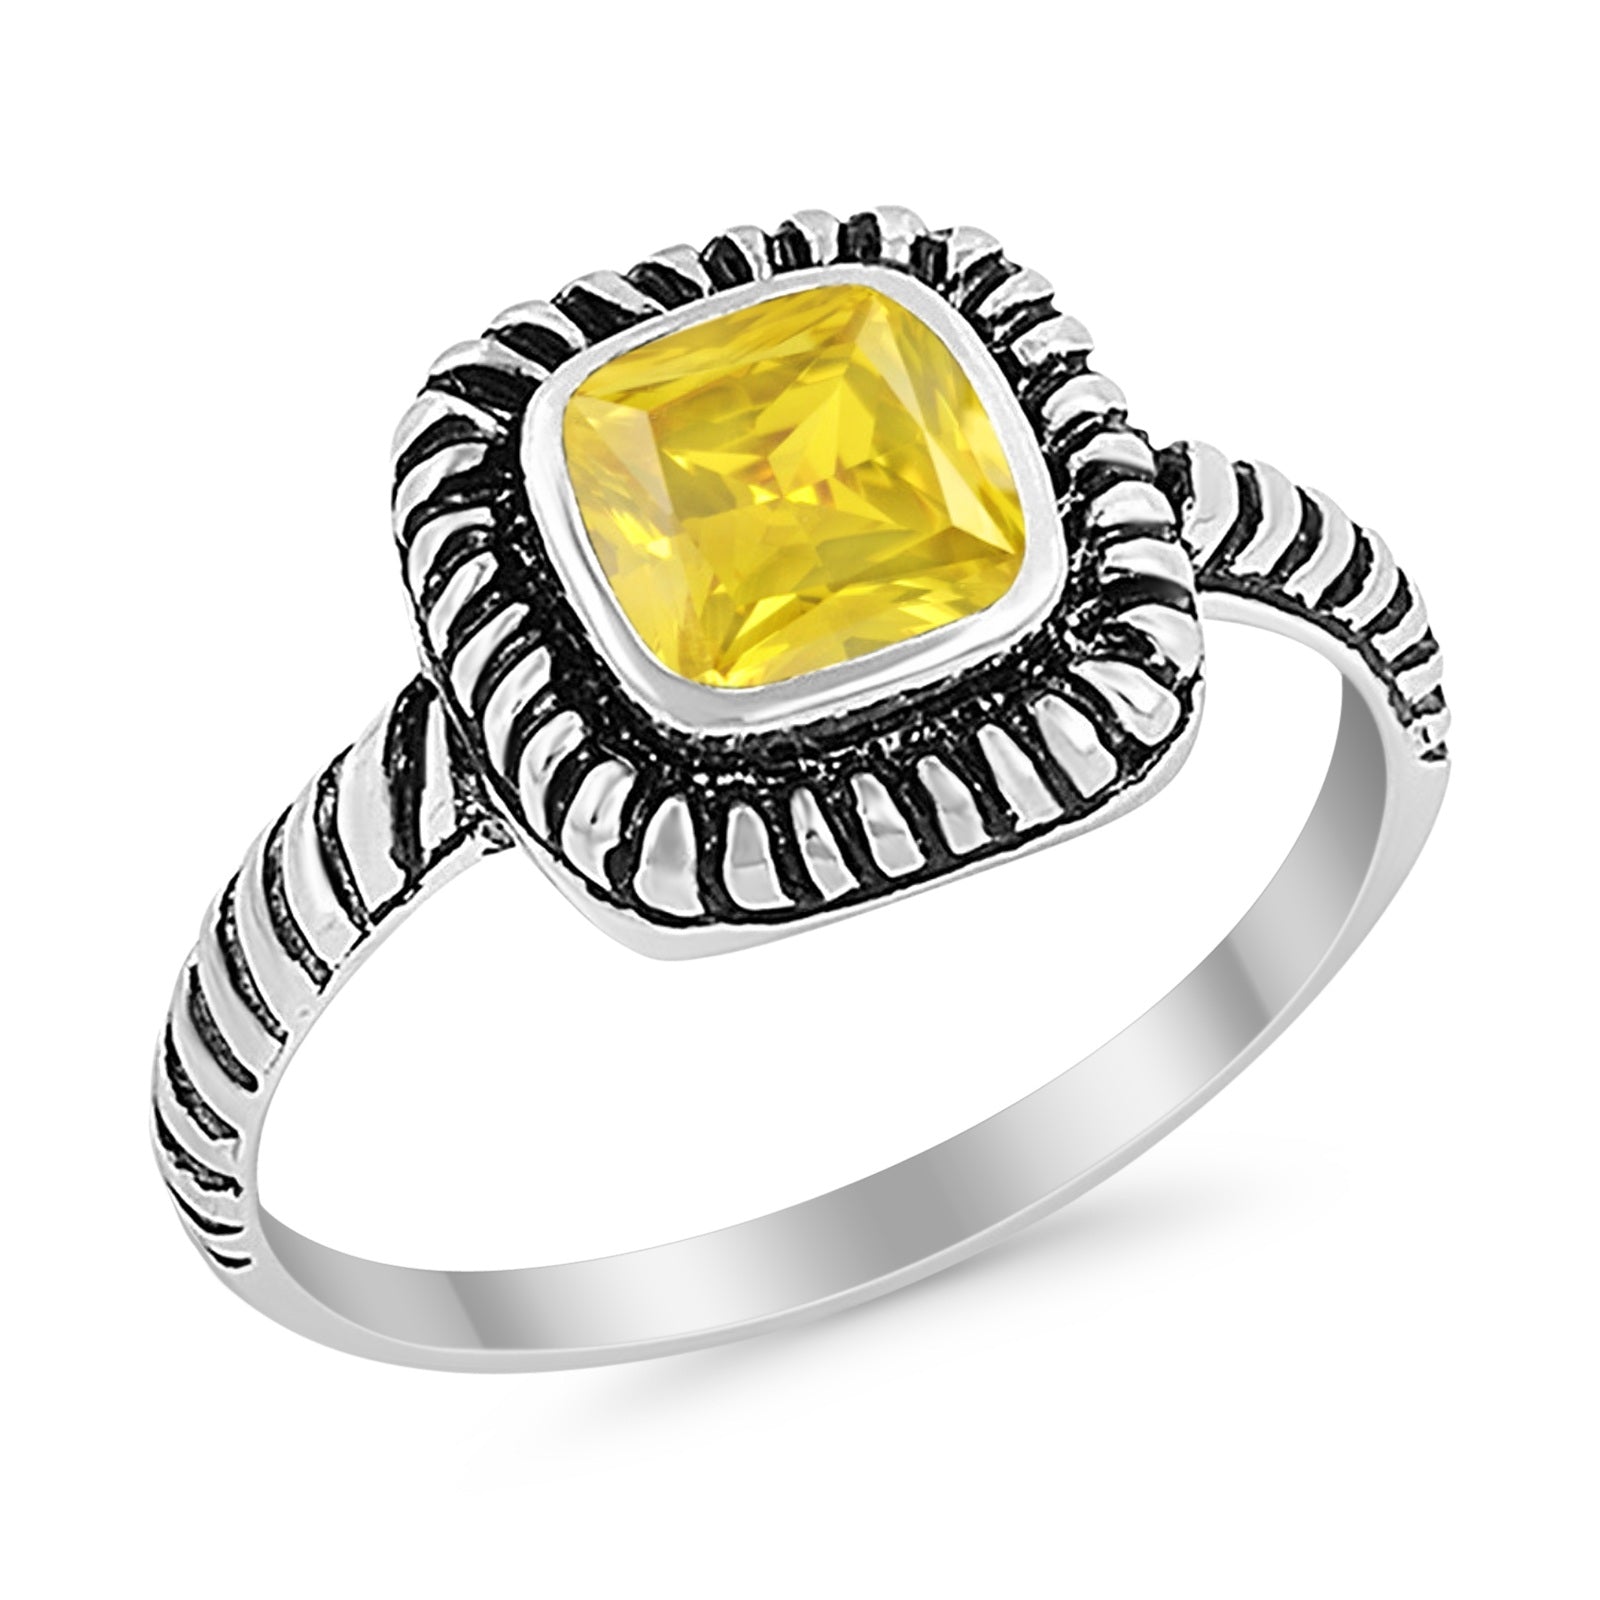 Princess Cut Simulated Yellow Cubic Zirconia Oxidized Design Ring 925 Sterling Silver